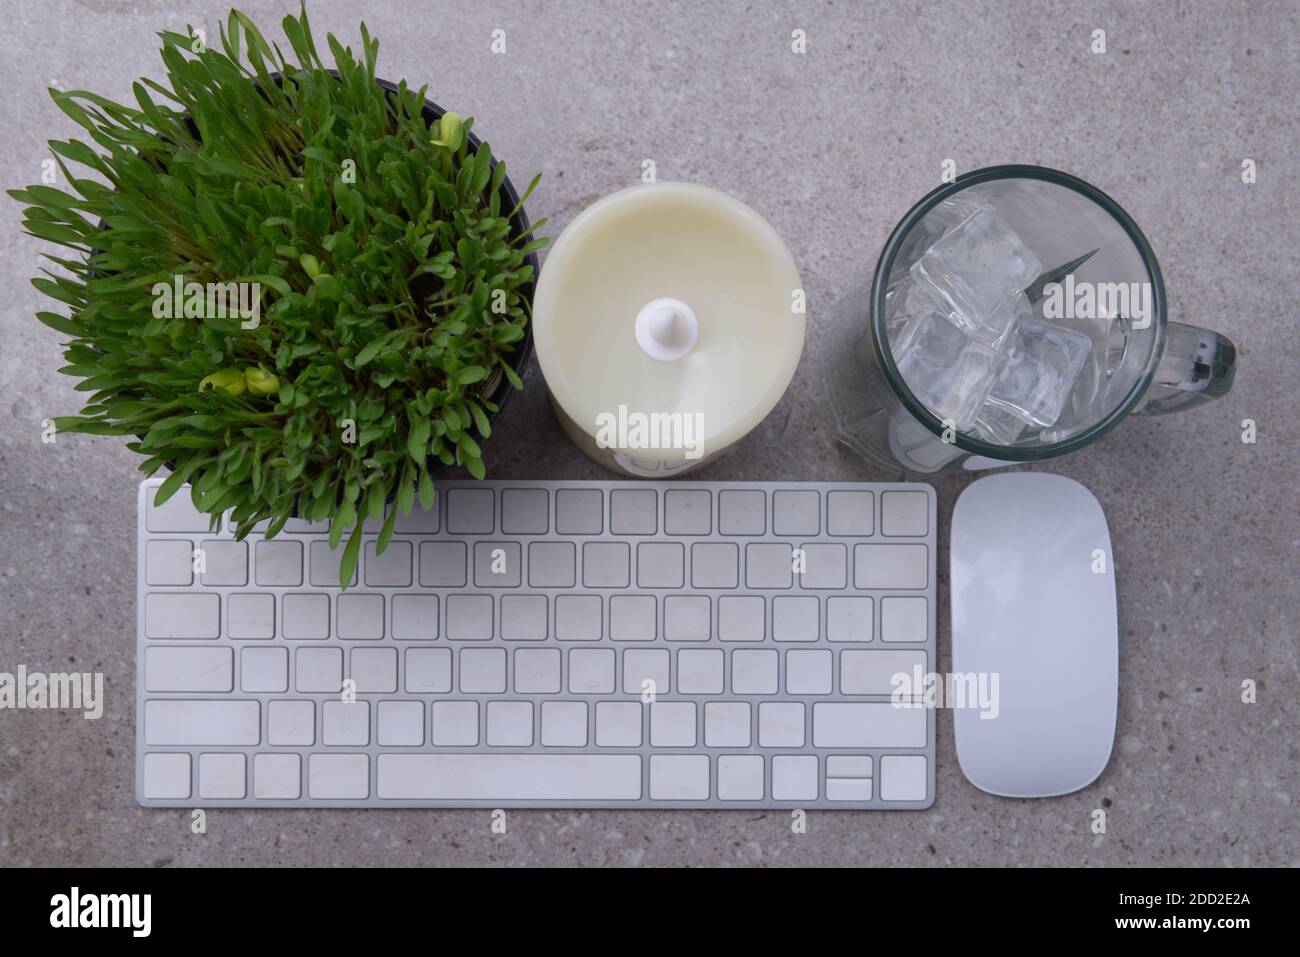 Close up view of millet grass plant in the pot with empty glass with ice cubes and the keyboard on the desk Stock Photo